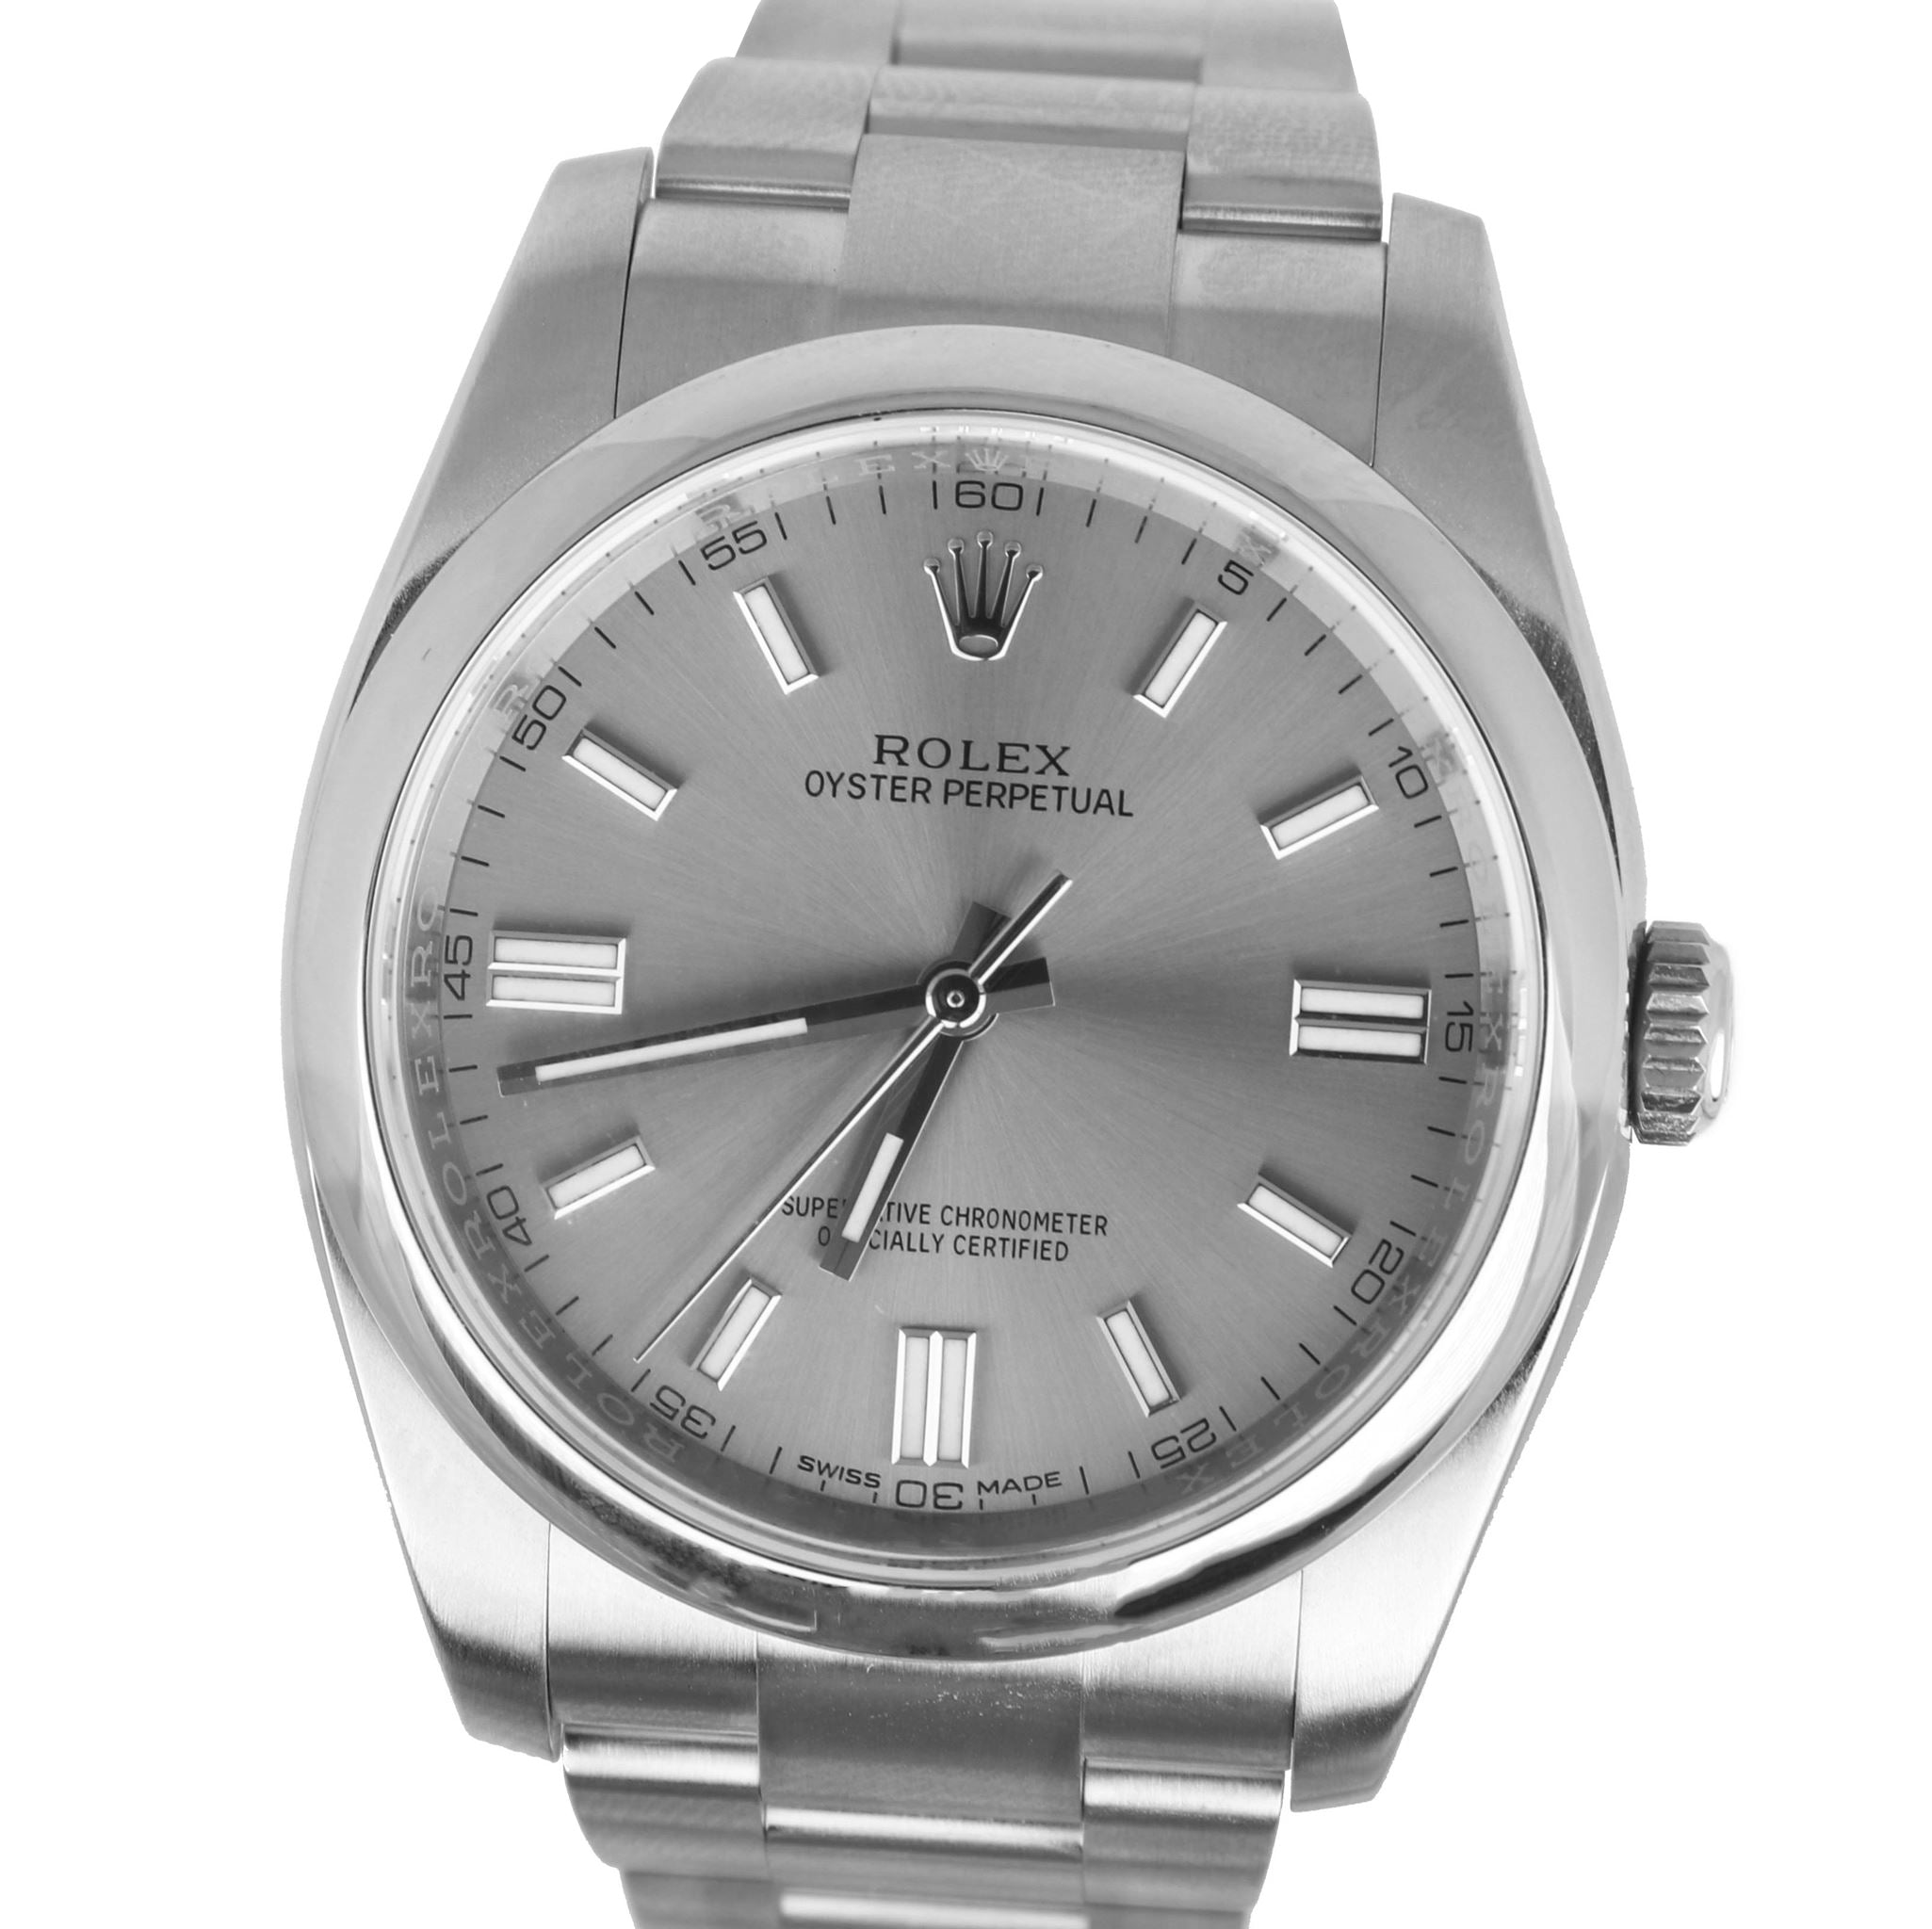 MINT 2019 Rolex Oyster Perpetual 116000 36mm Gray Rhodium Stainless Steel Watch